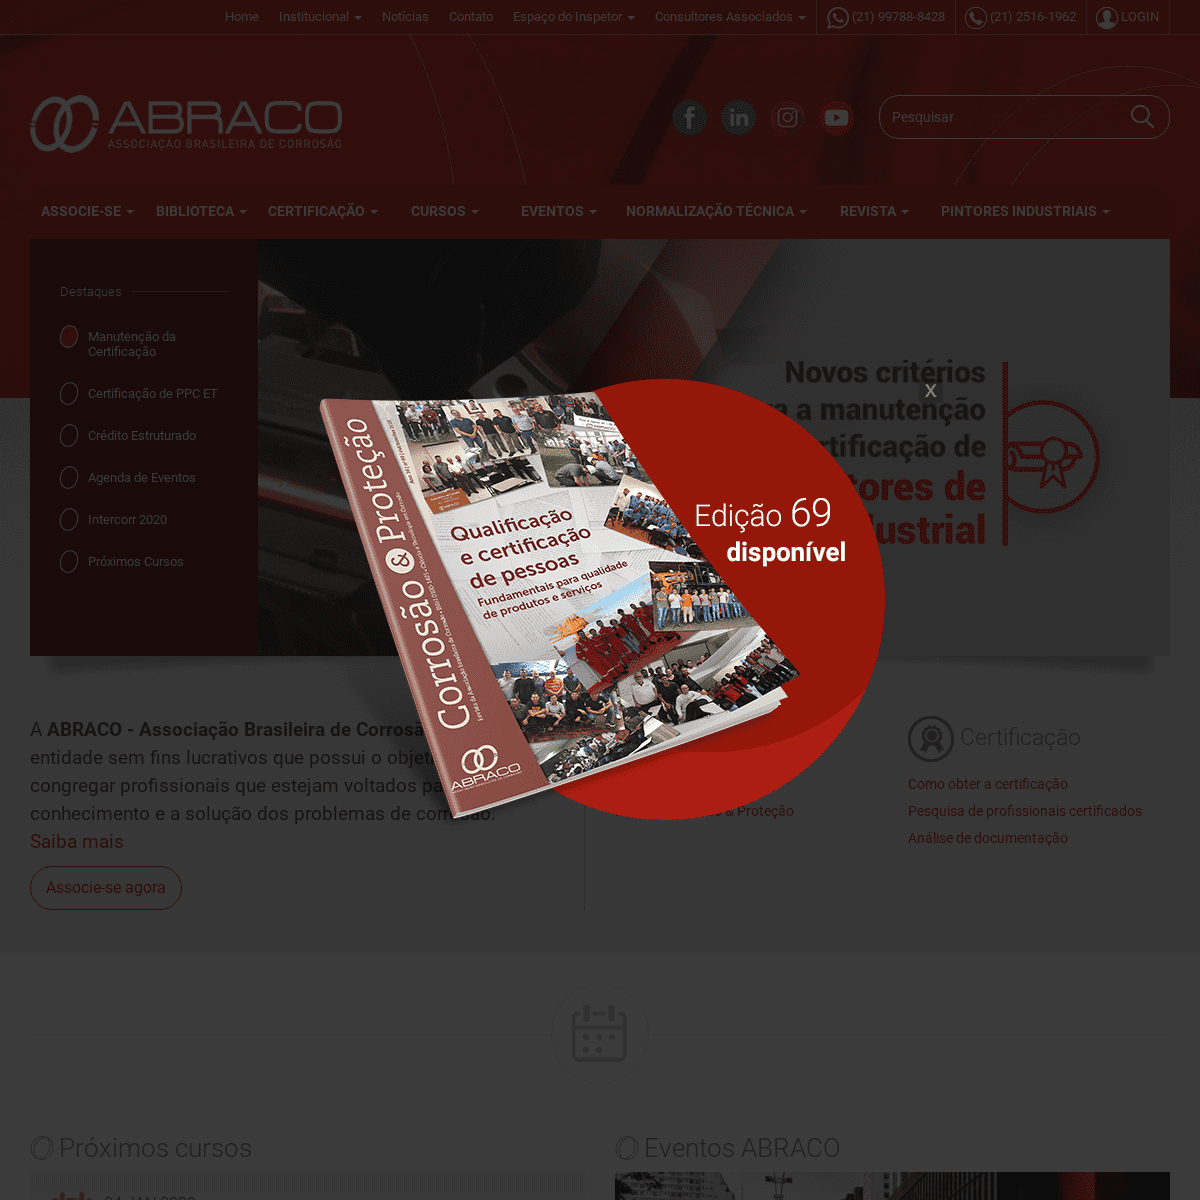 A complete backup of abraco.org.br